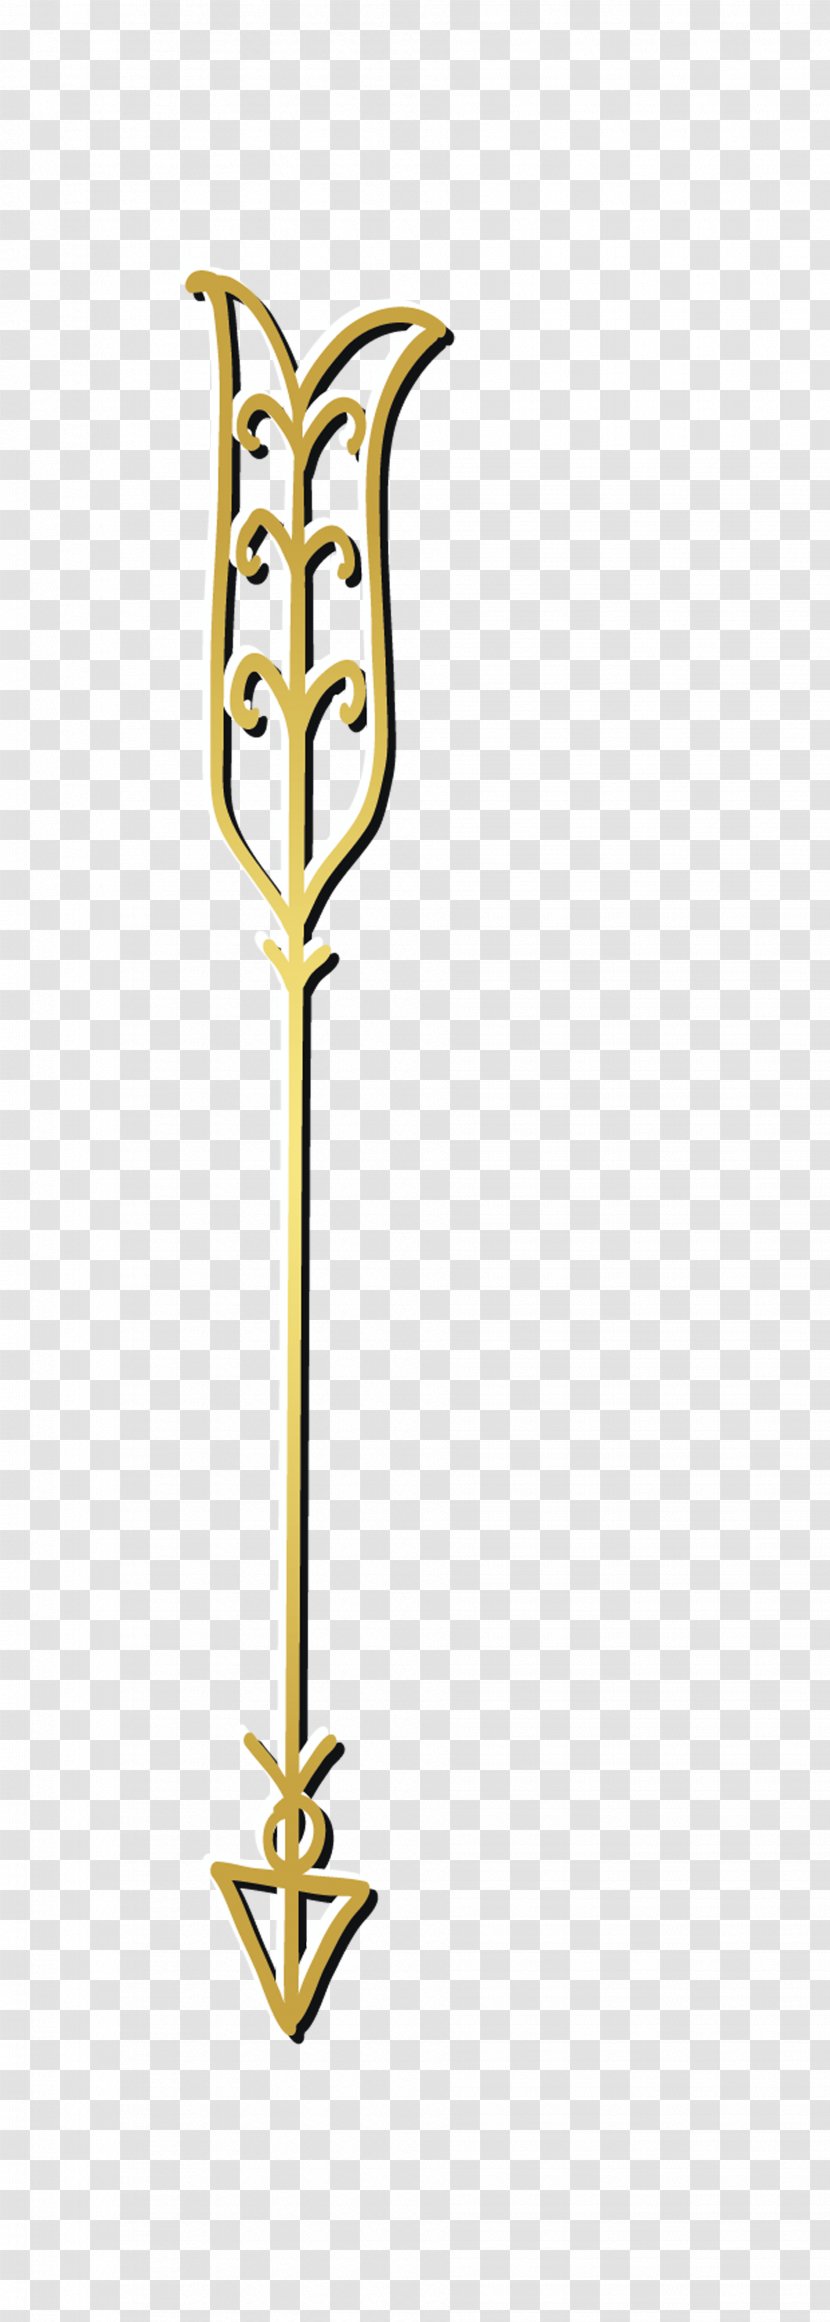 Bow And Arrow - Archery - Gold Material Transparent PNG